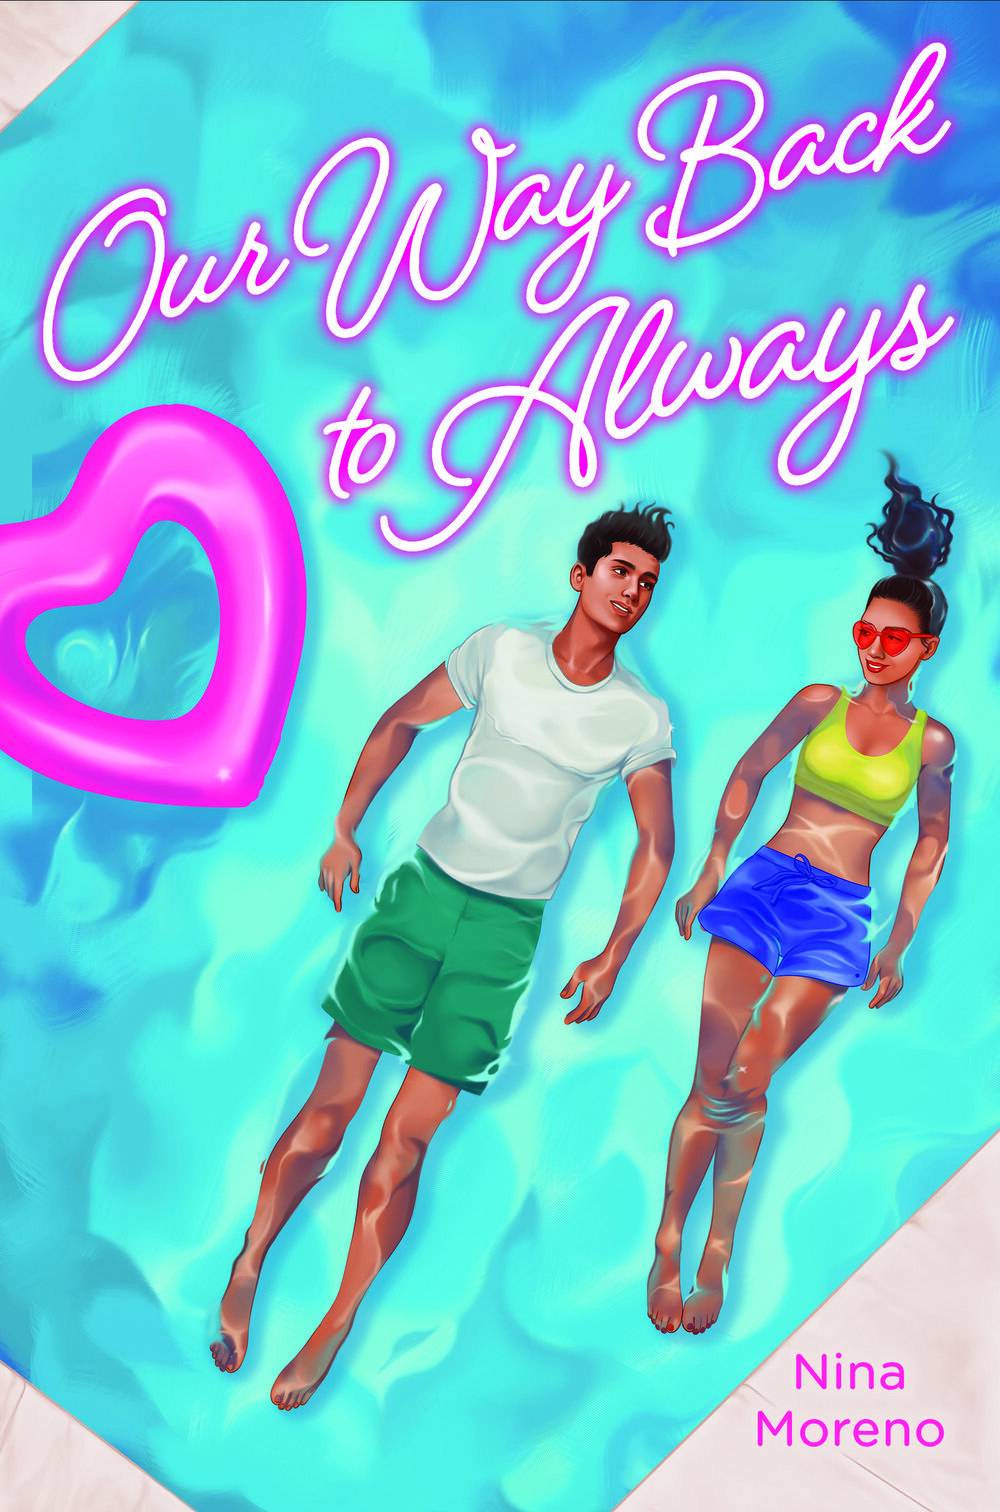 Our Way Back To Always book cover. Book by Nina Moreno